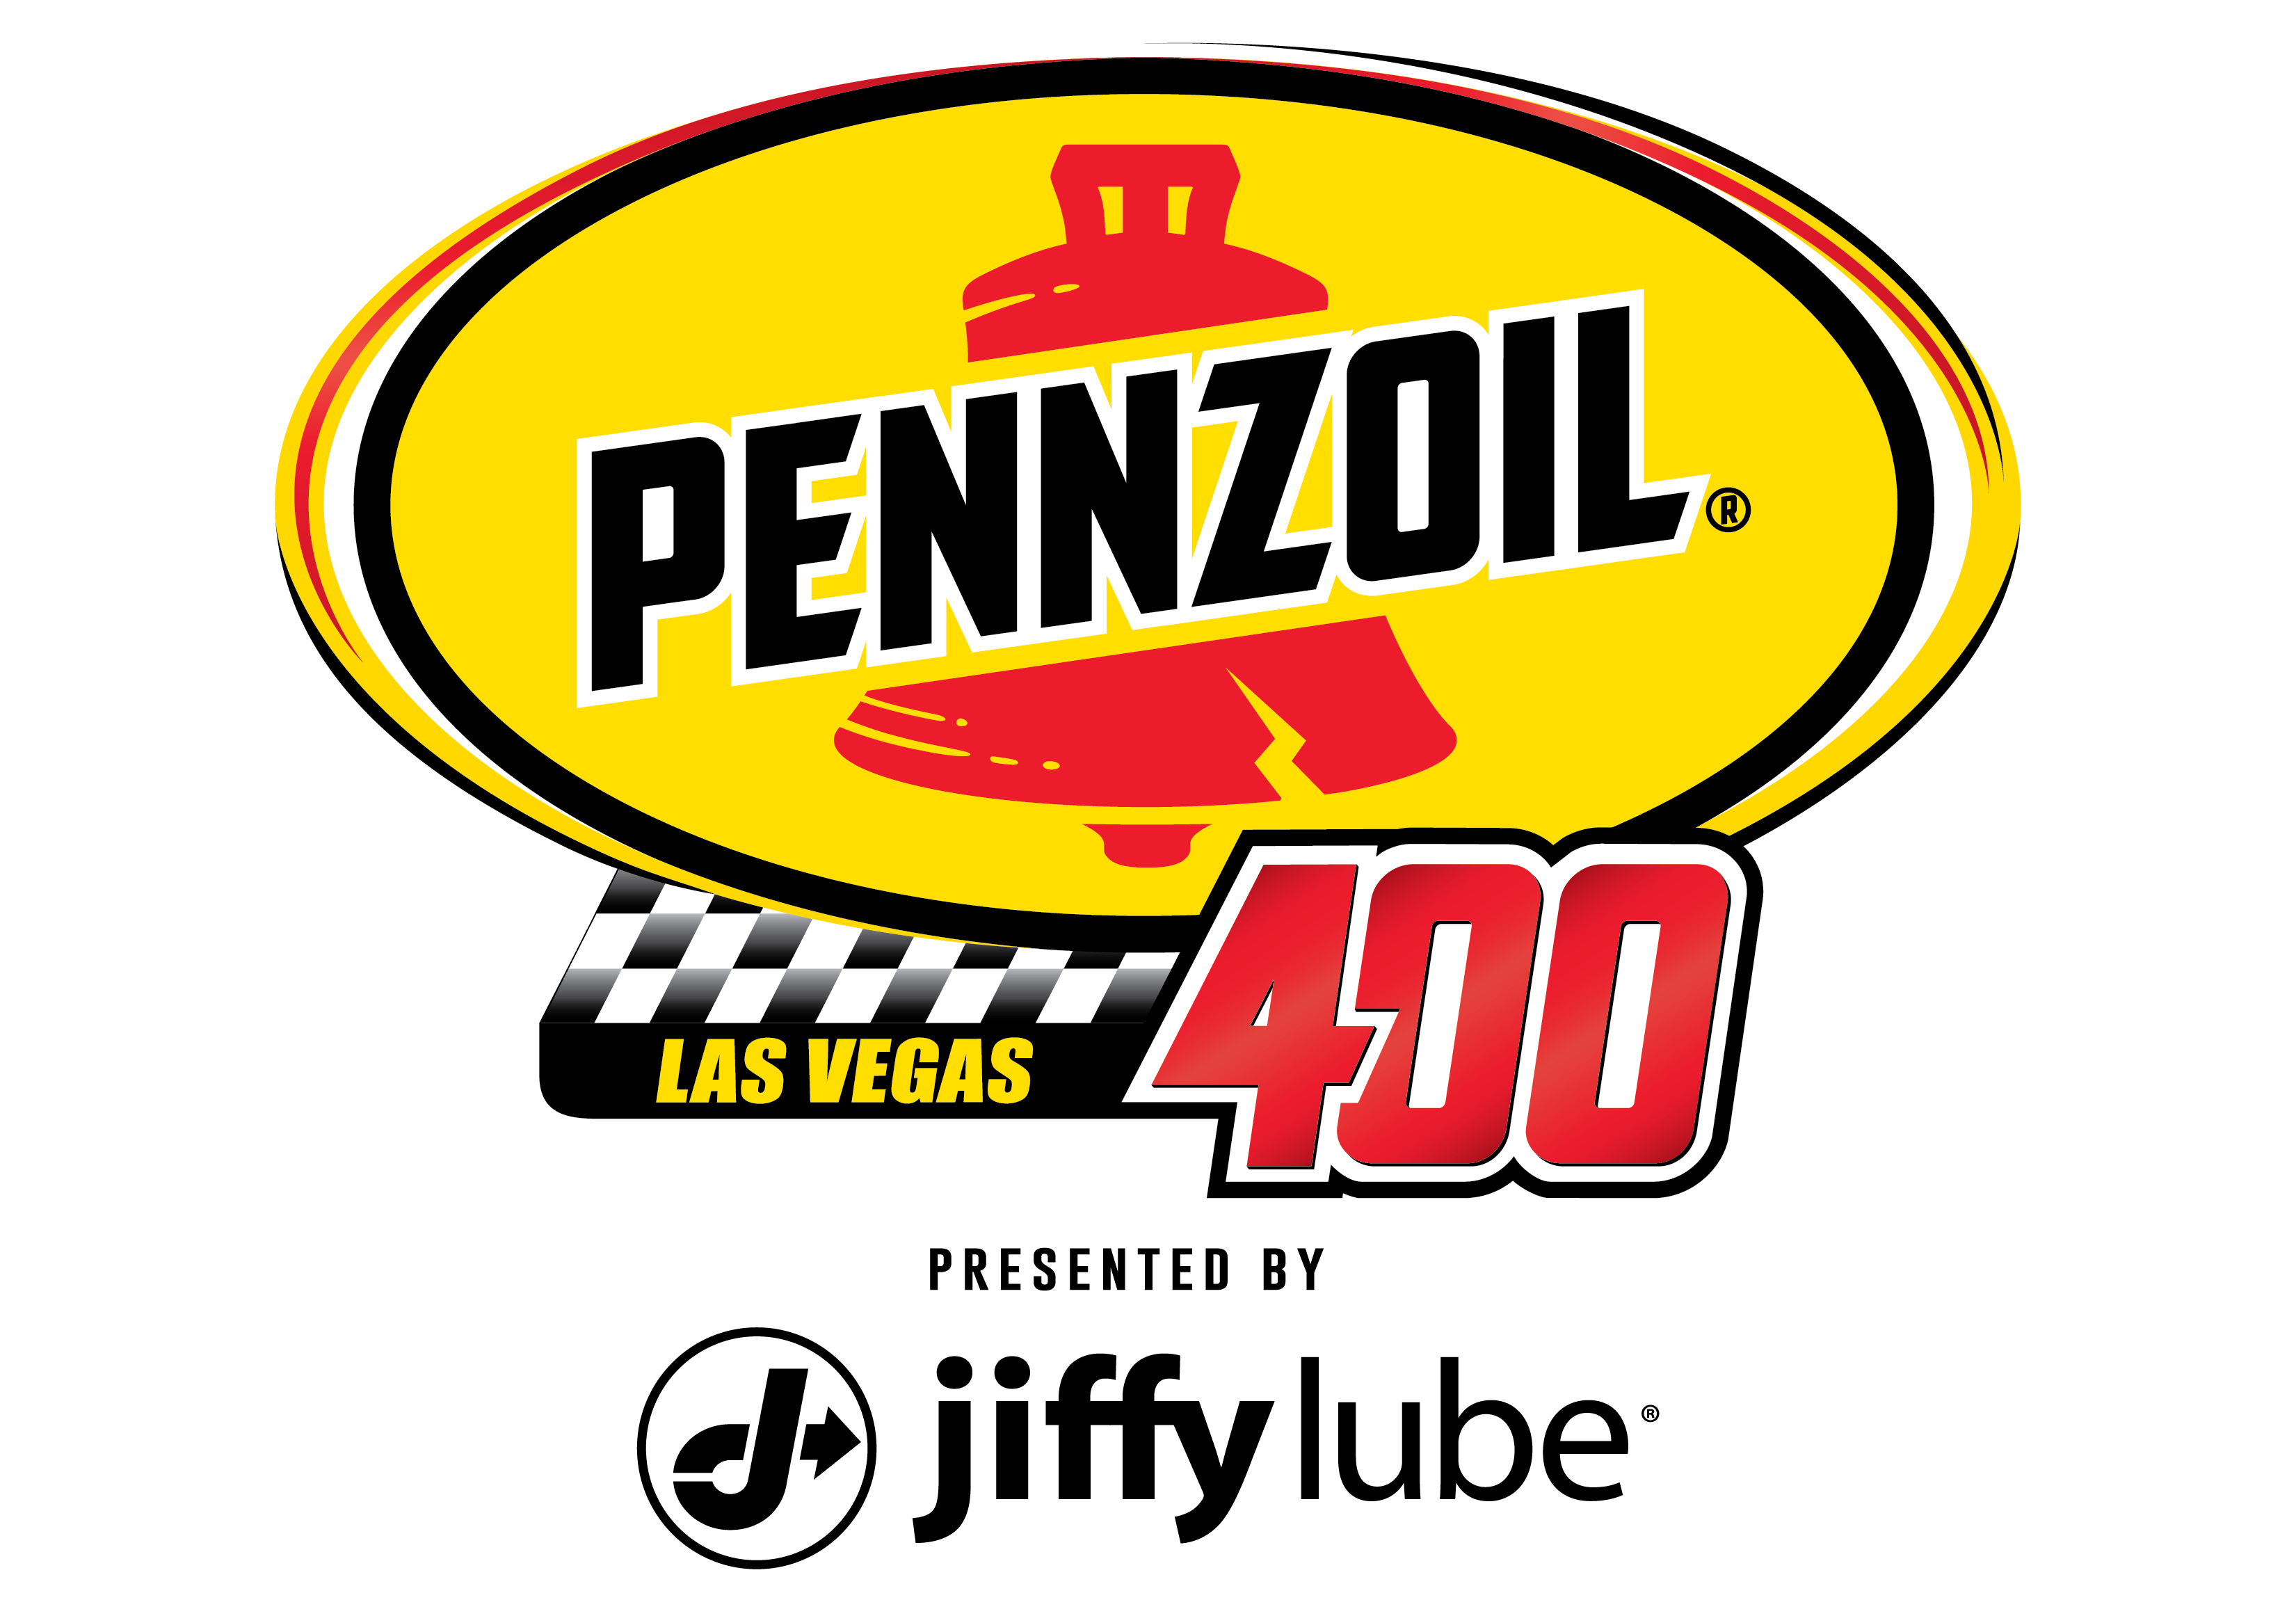 Pennzoil 400 Camping